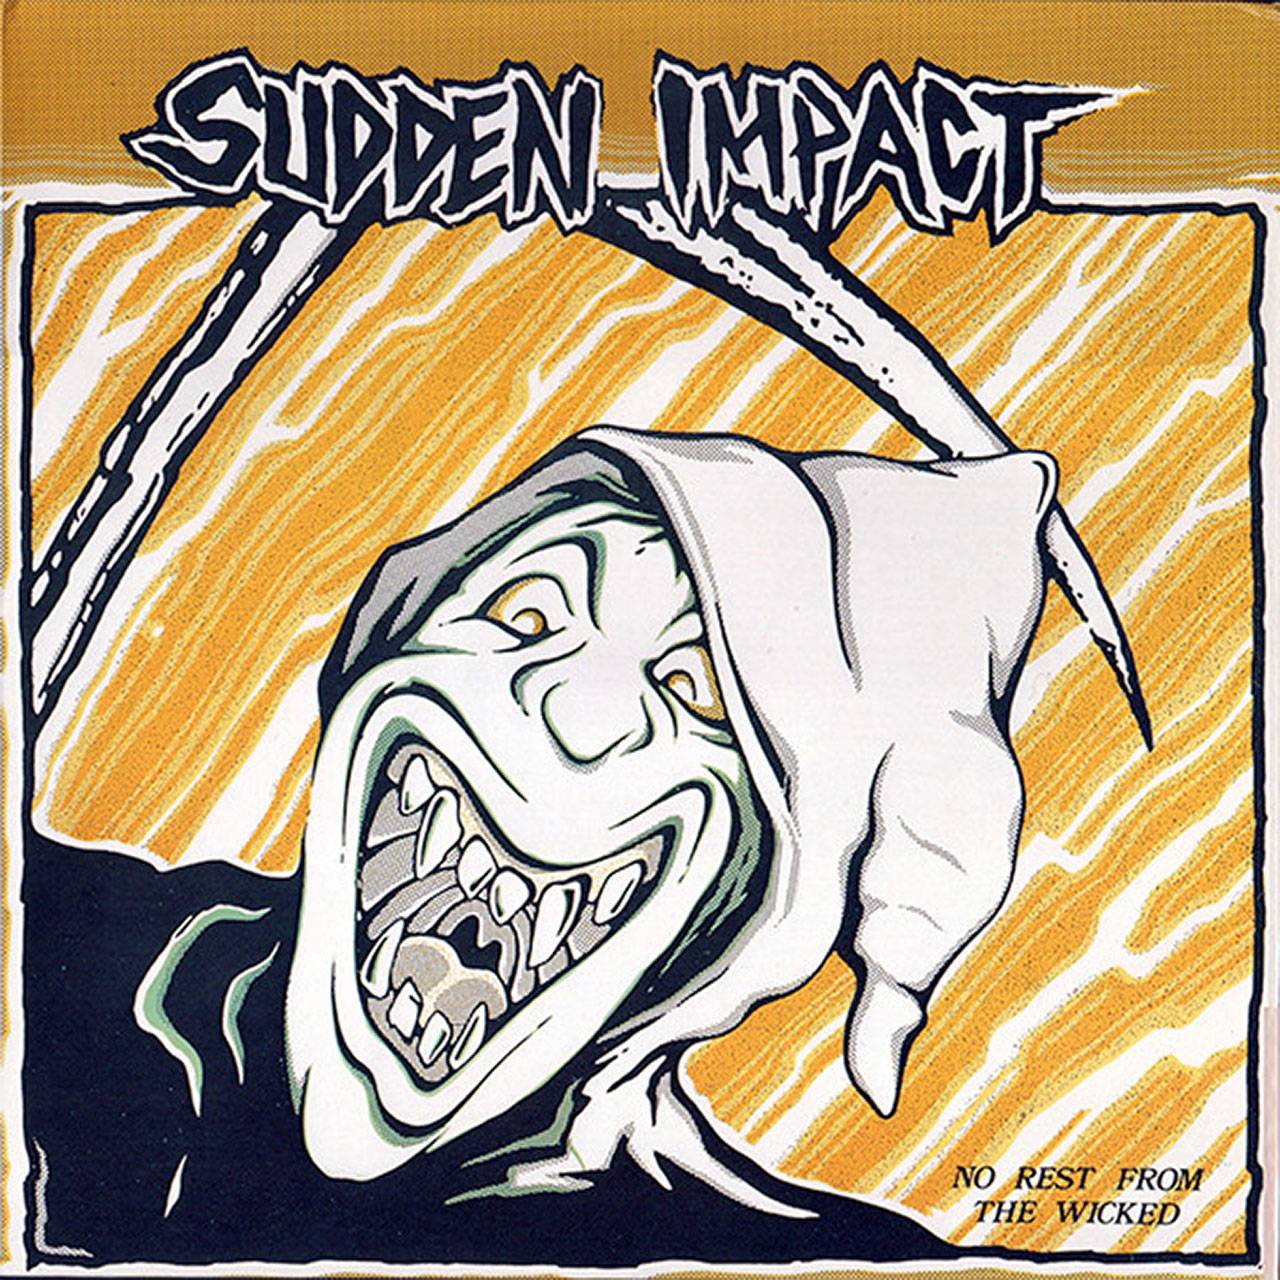 Sudden Impact - No Rest From The Wicked (1986)